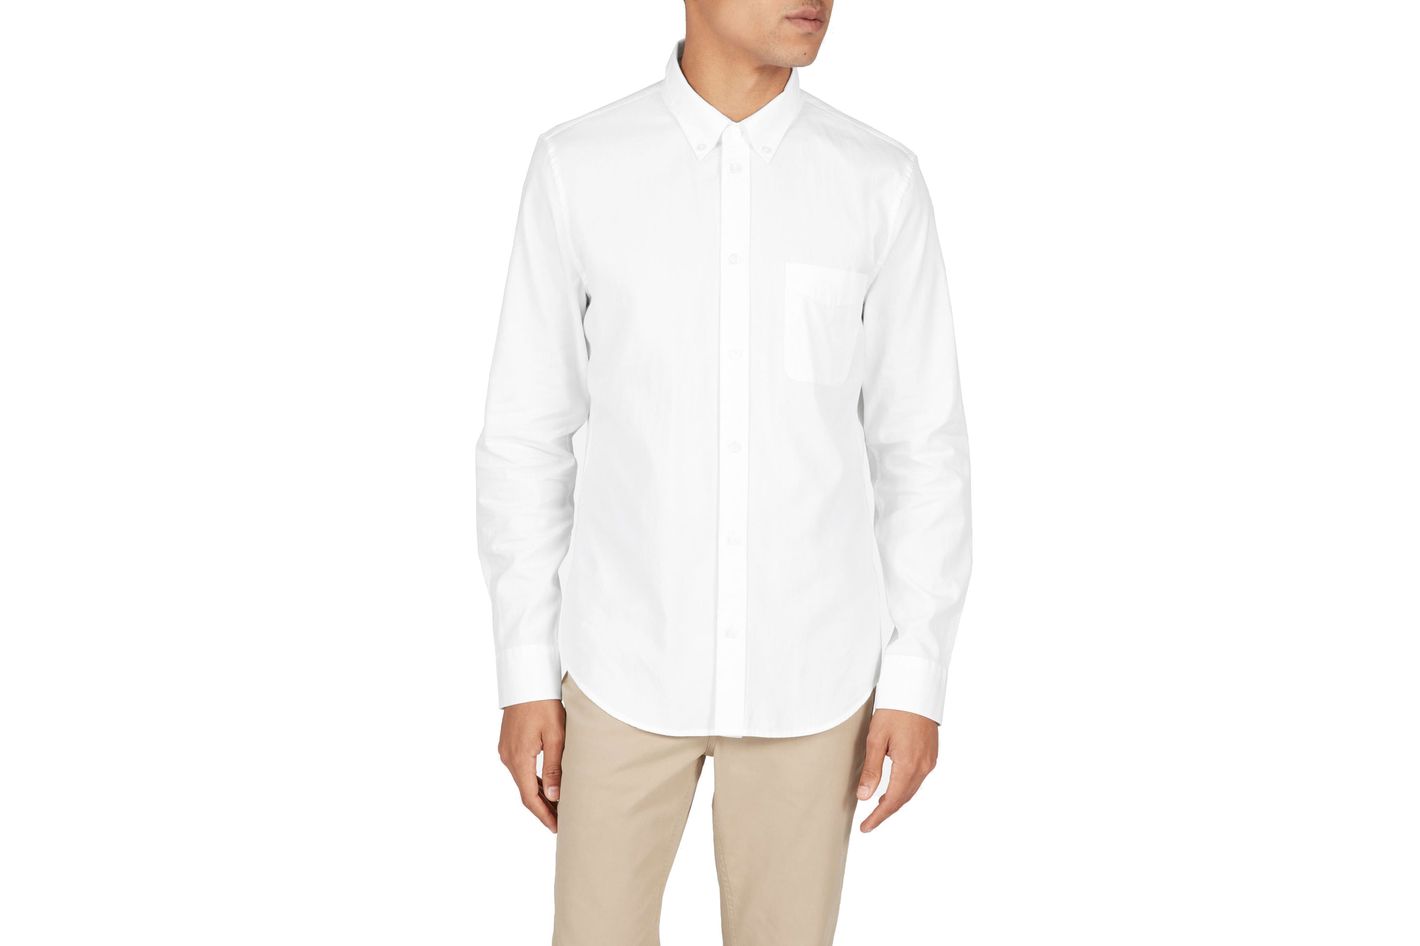 Best White Button-down Shirts for Women